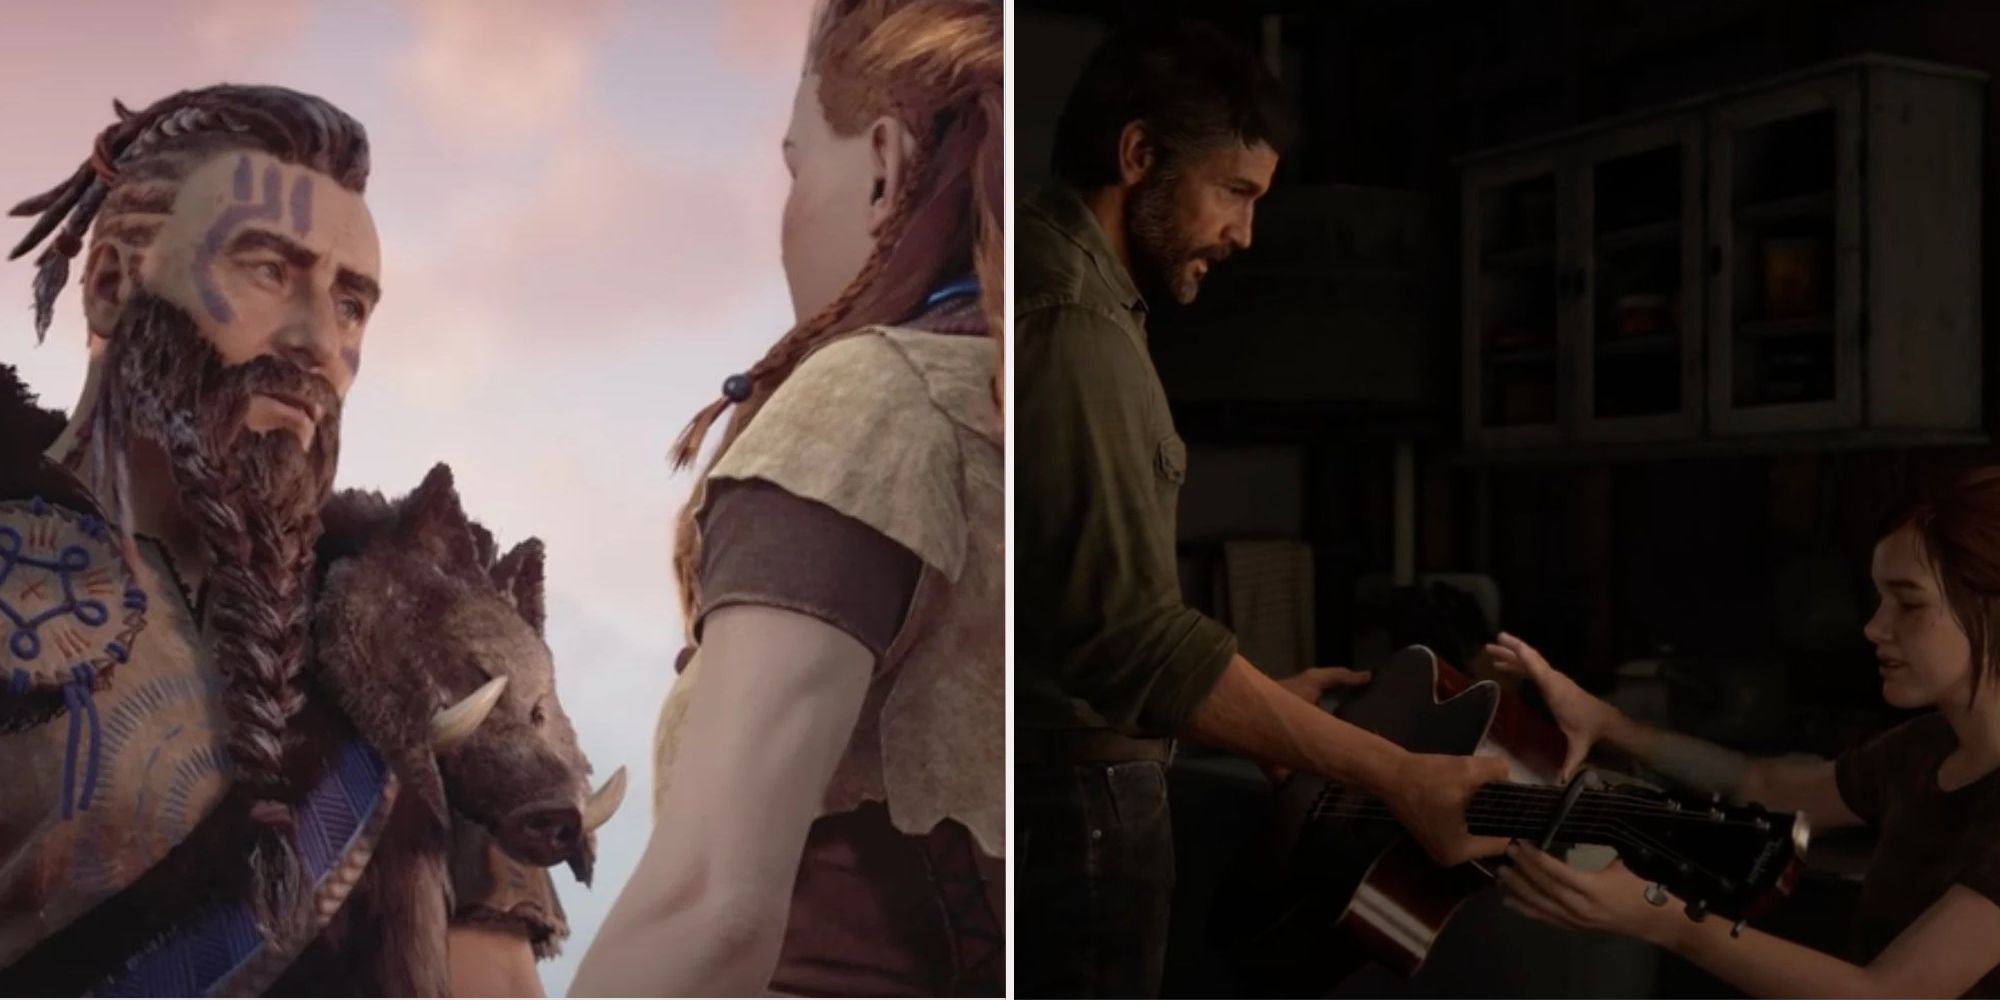 Gaming teachers horizon and tlou side by side